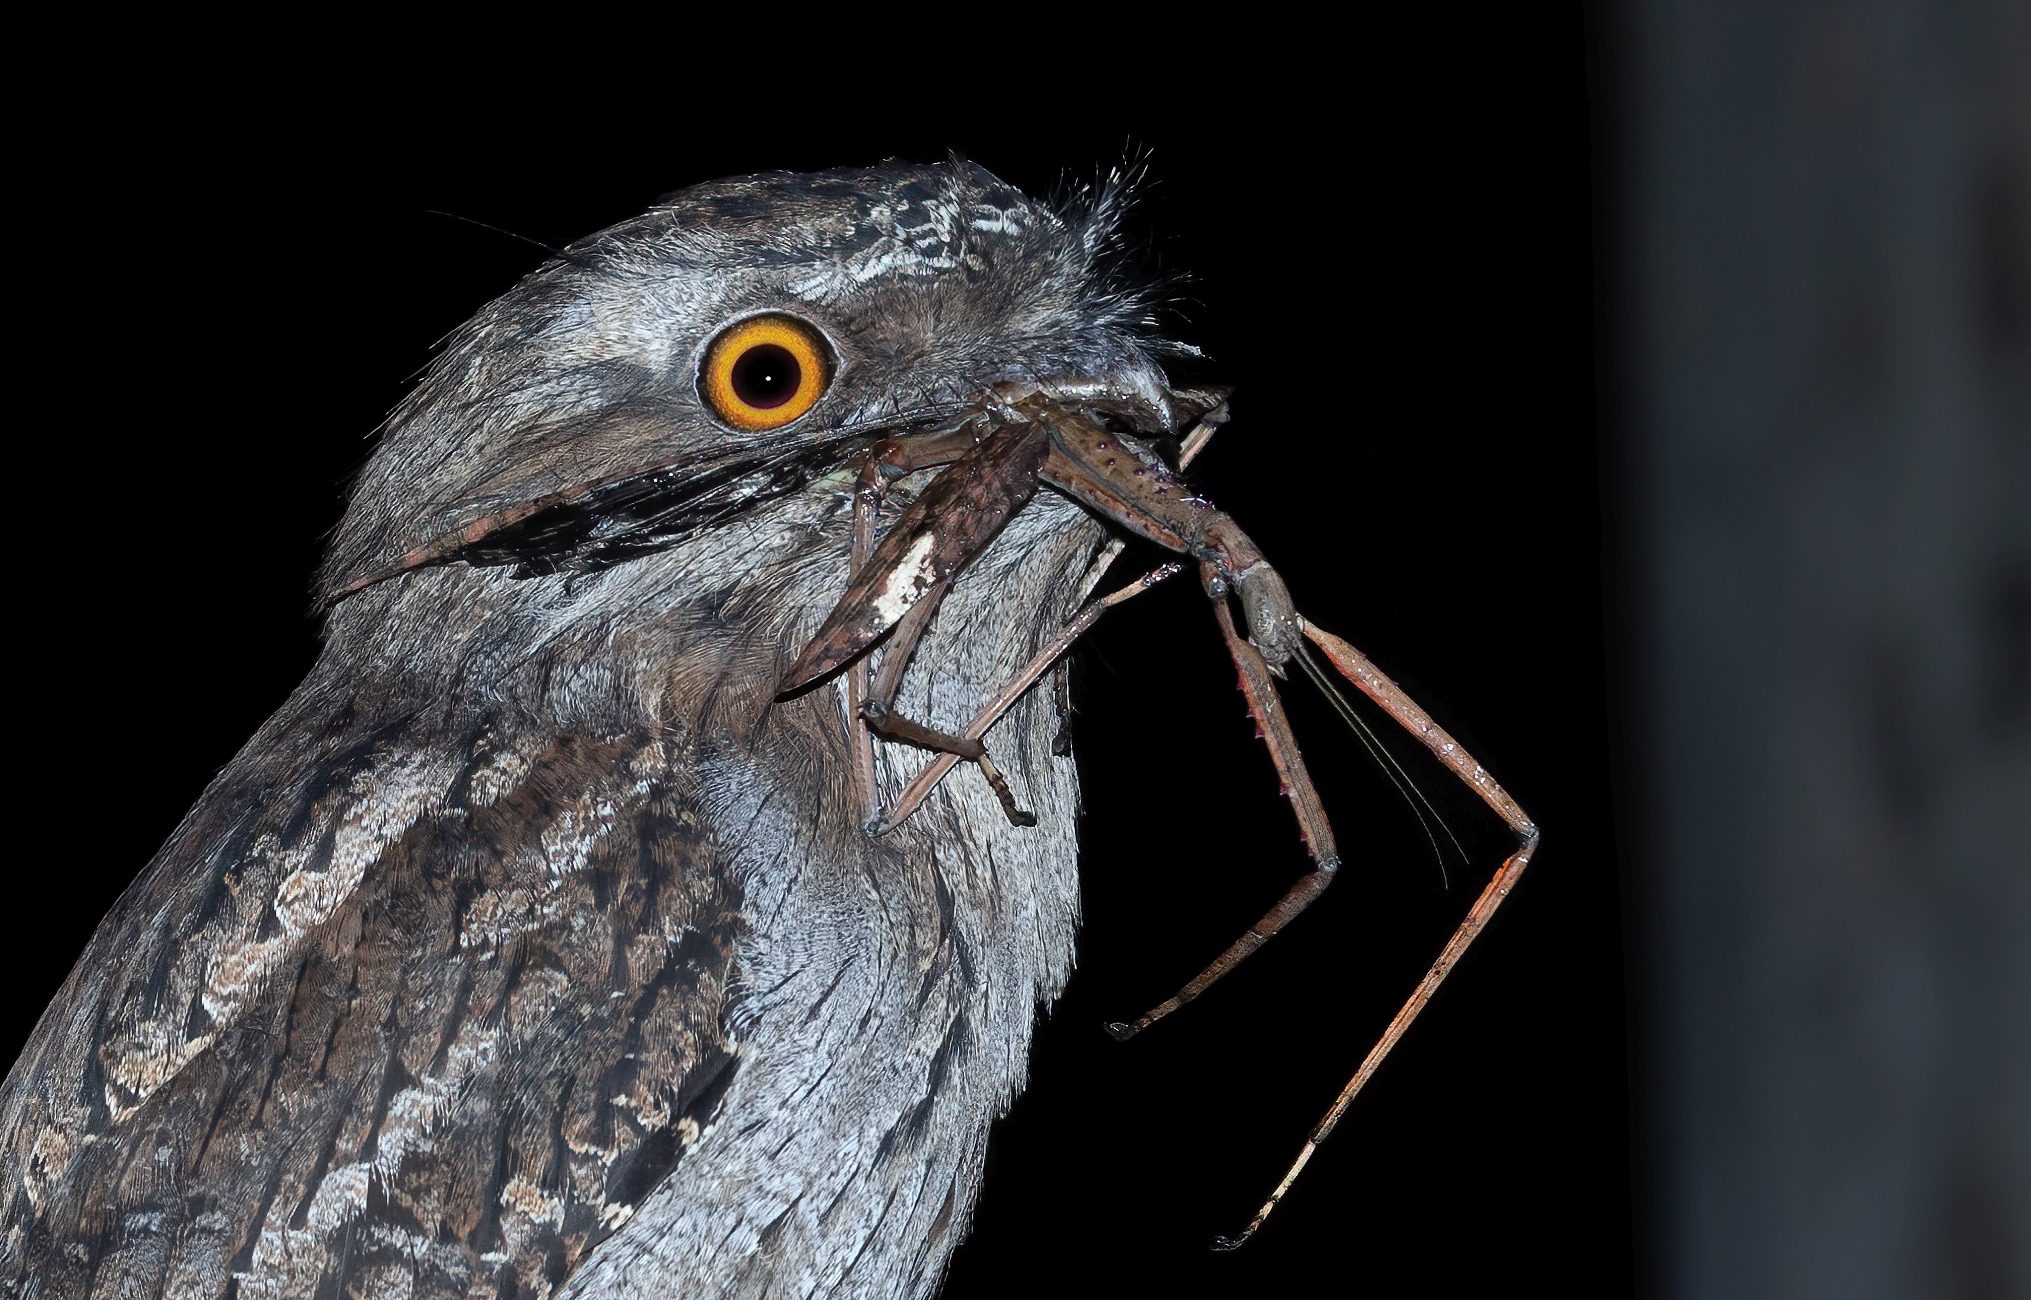 A gray bird with an orange eye holds a large insect in its bill.